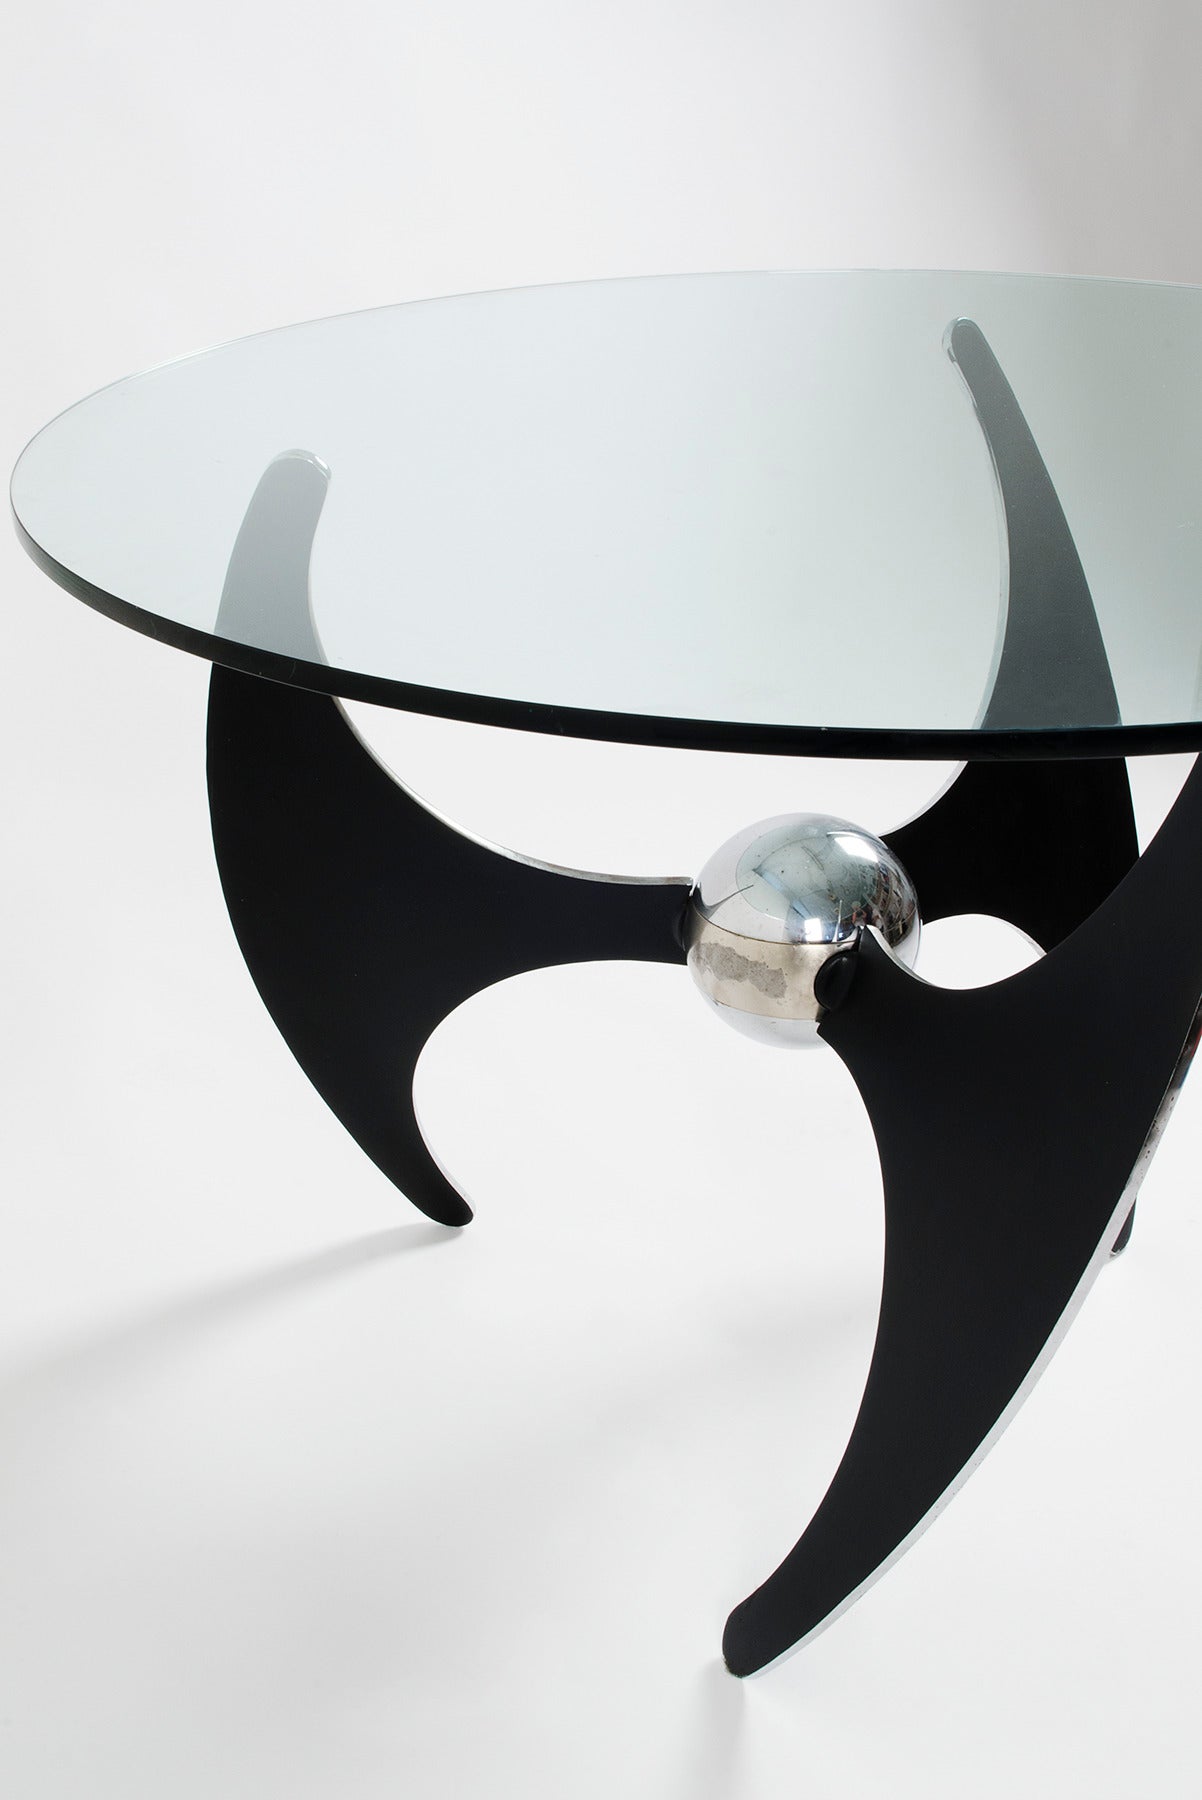 Italian Adjustable Coffee or Dining Table by L. Campanini for Cama, 1973